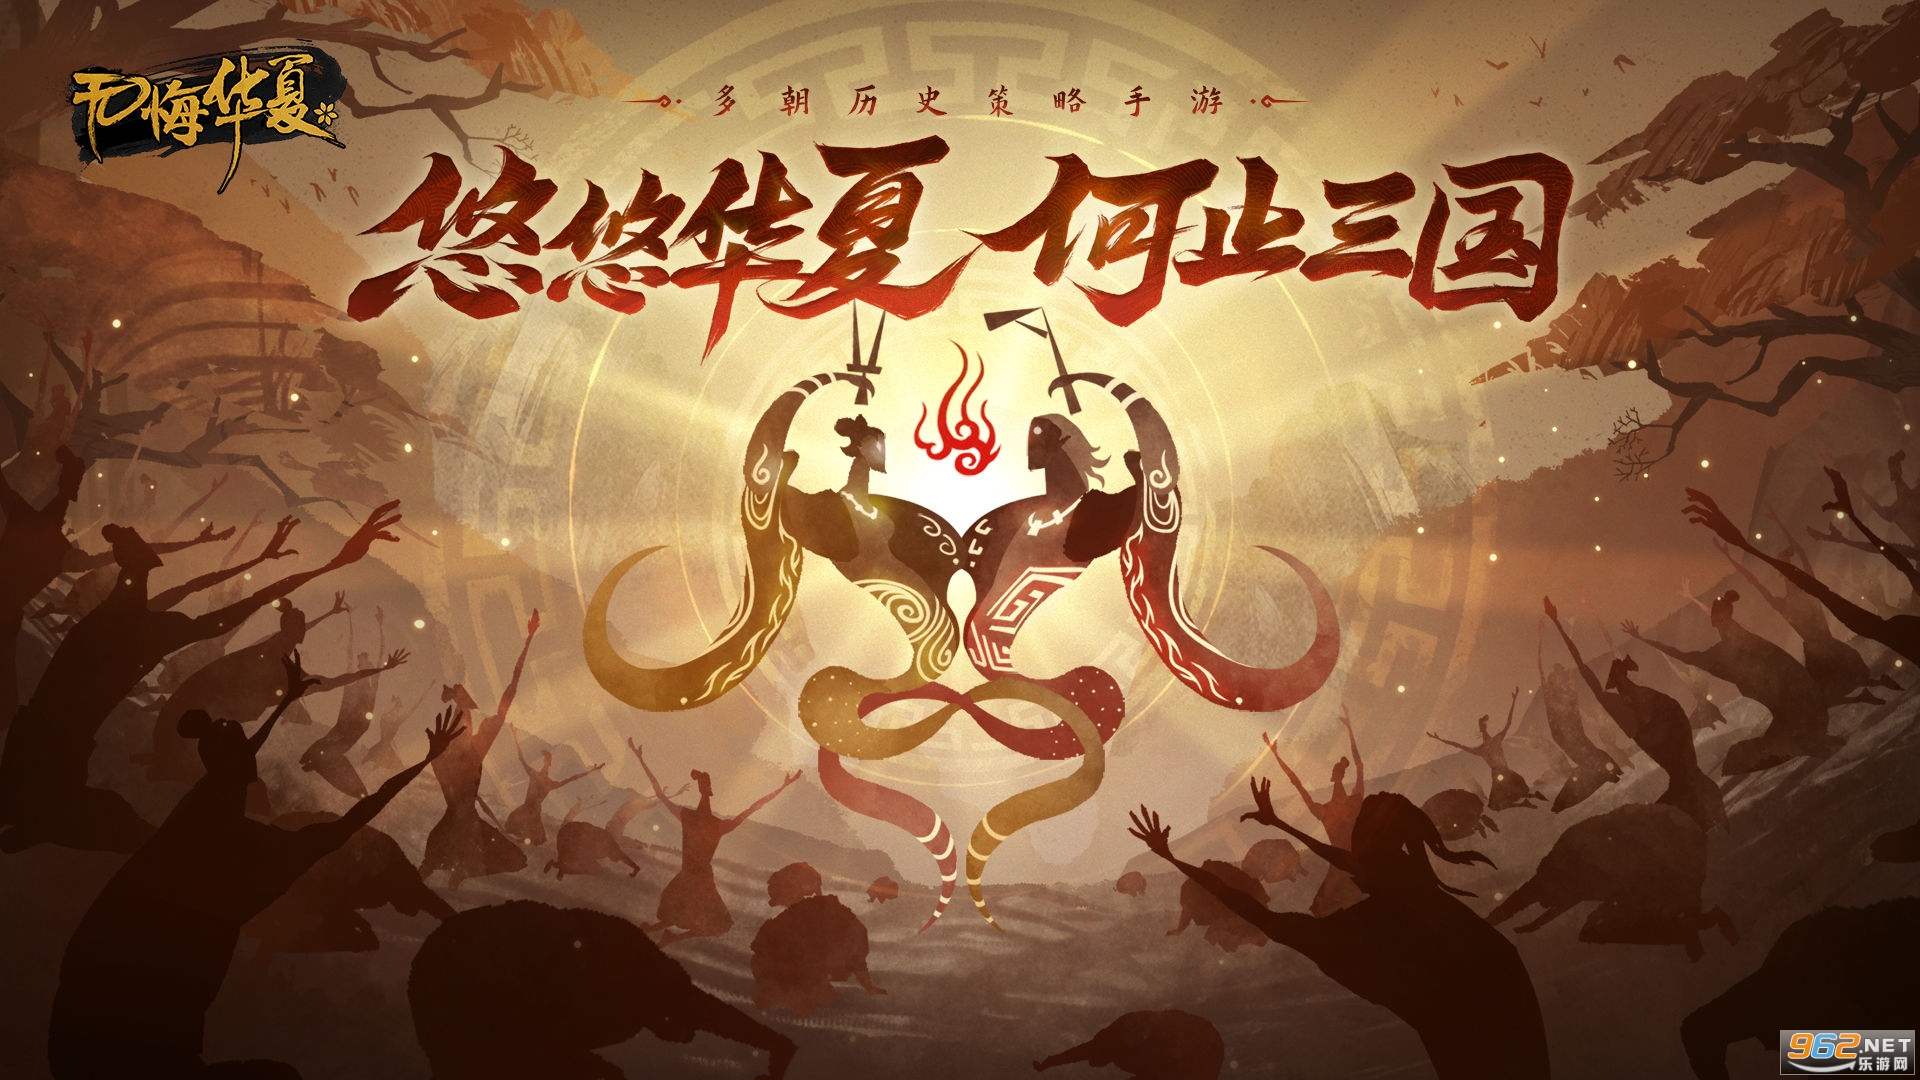  No regrets screenshot of official Chinese mobile game v3.4.91 Android version 0